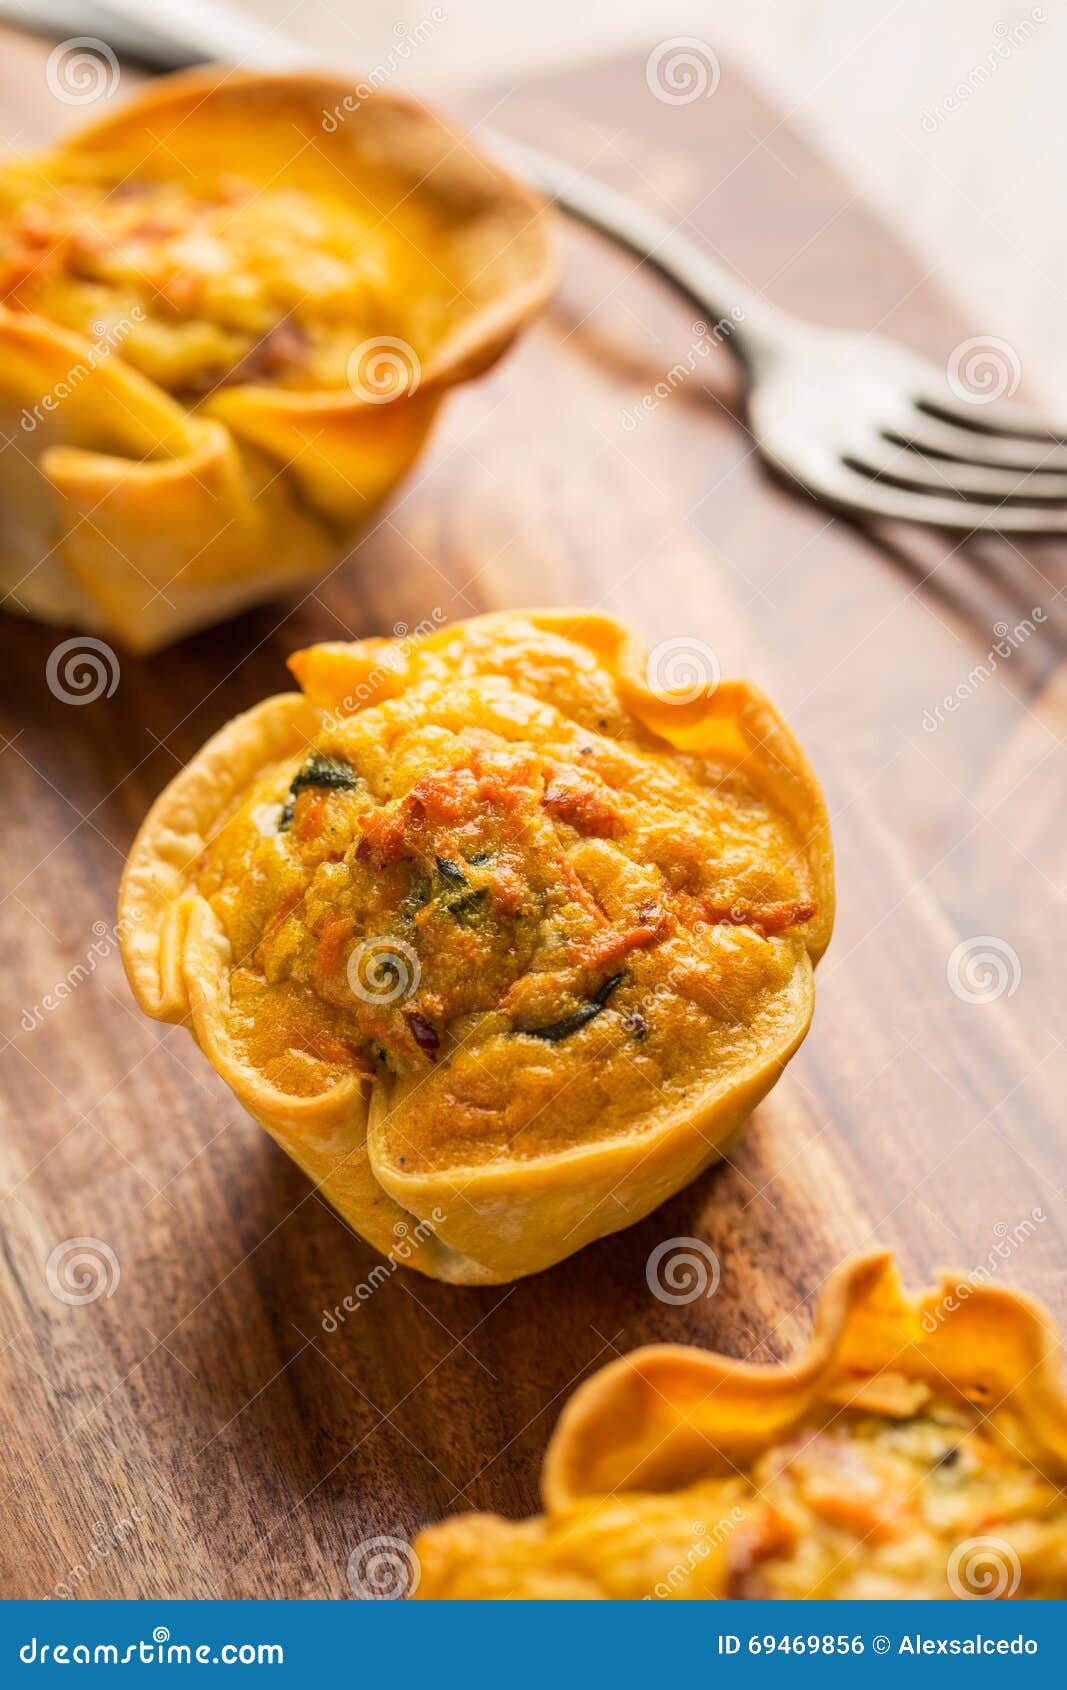 Small vegan carrot quiche stock photo. Image of meal - 69469856